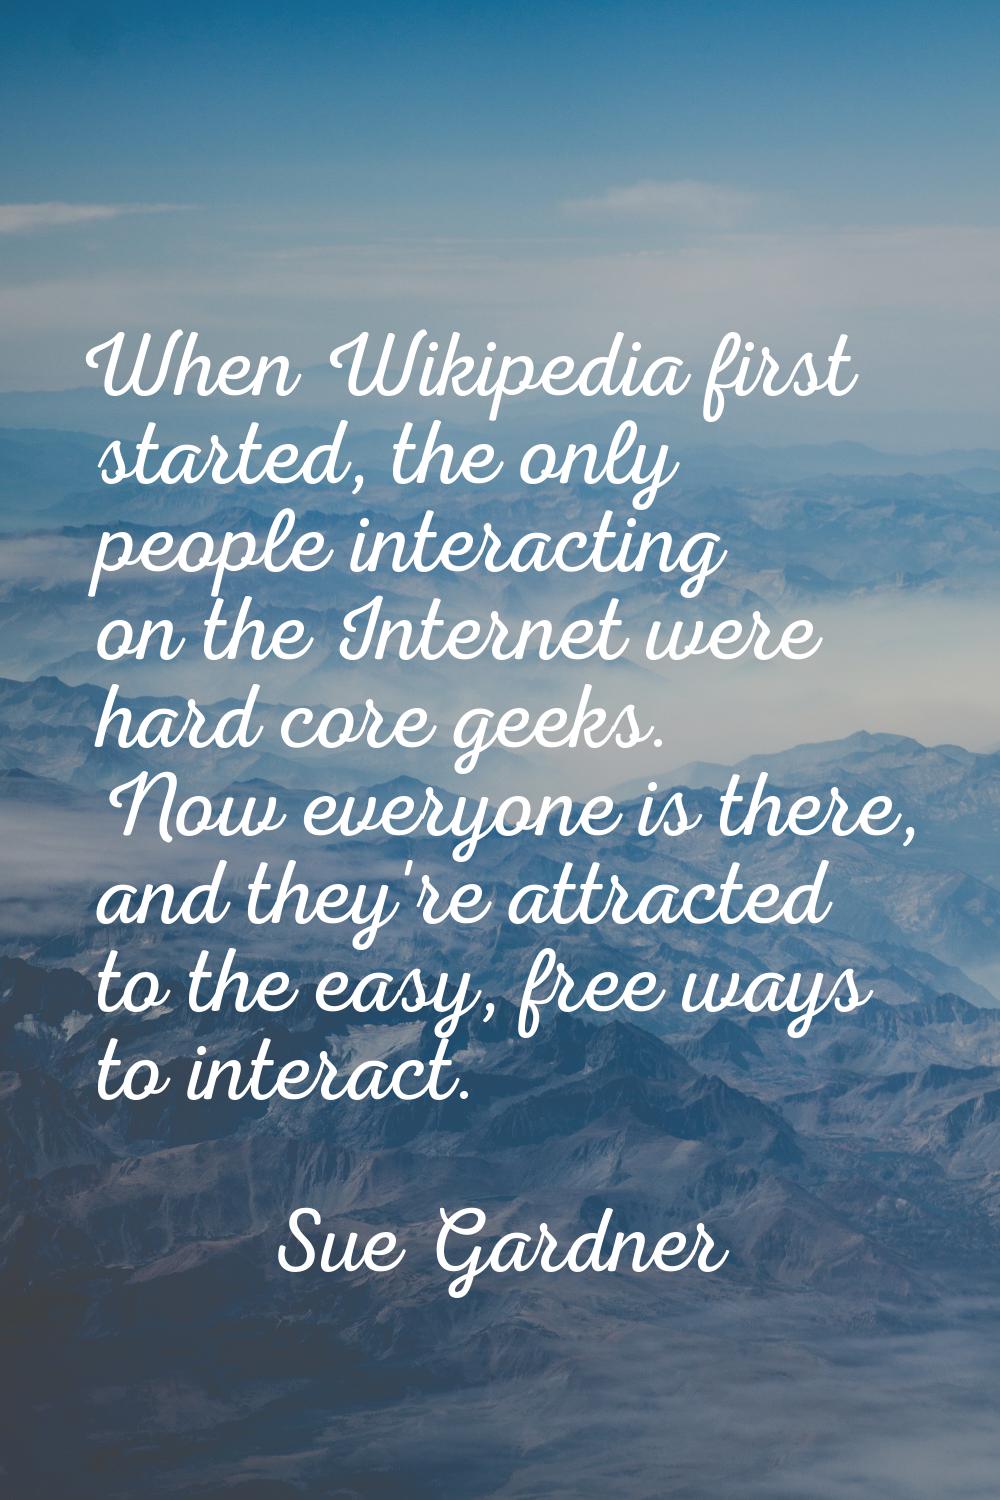 When Wikipedia first started, the only people interacting on the Internet were hard core geeks. Now